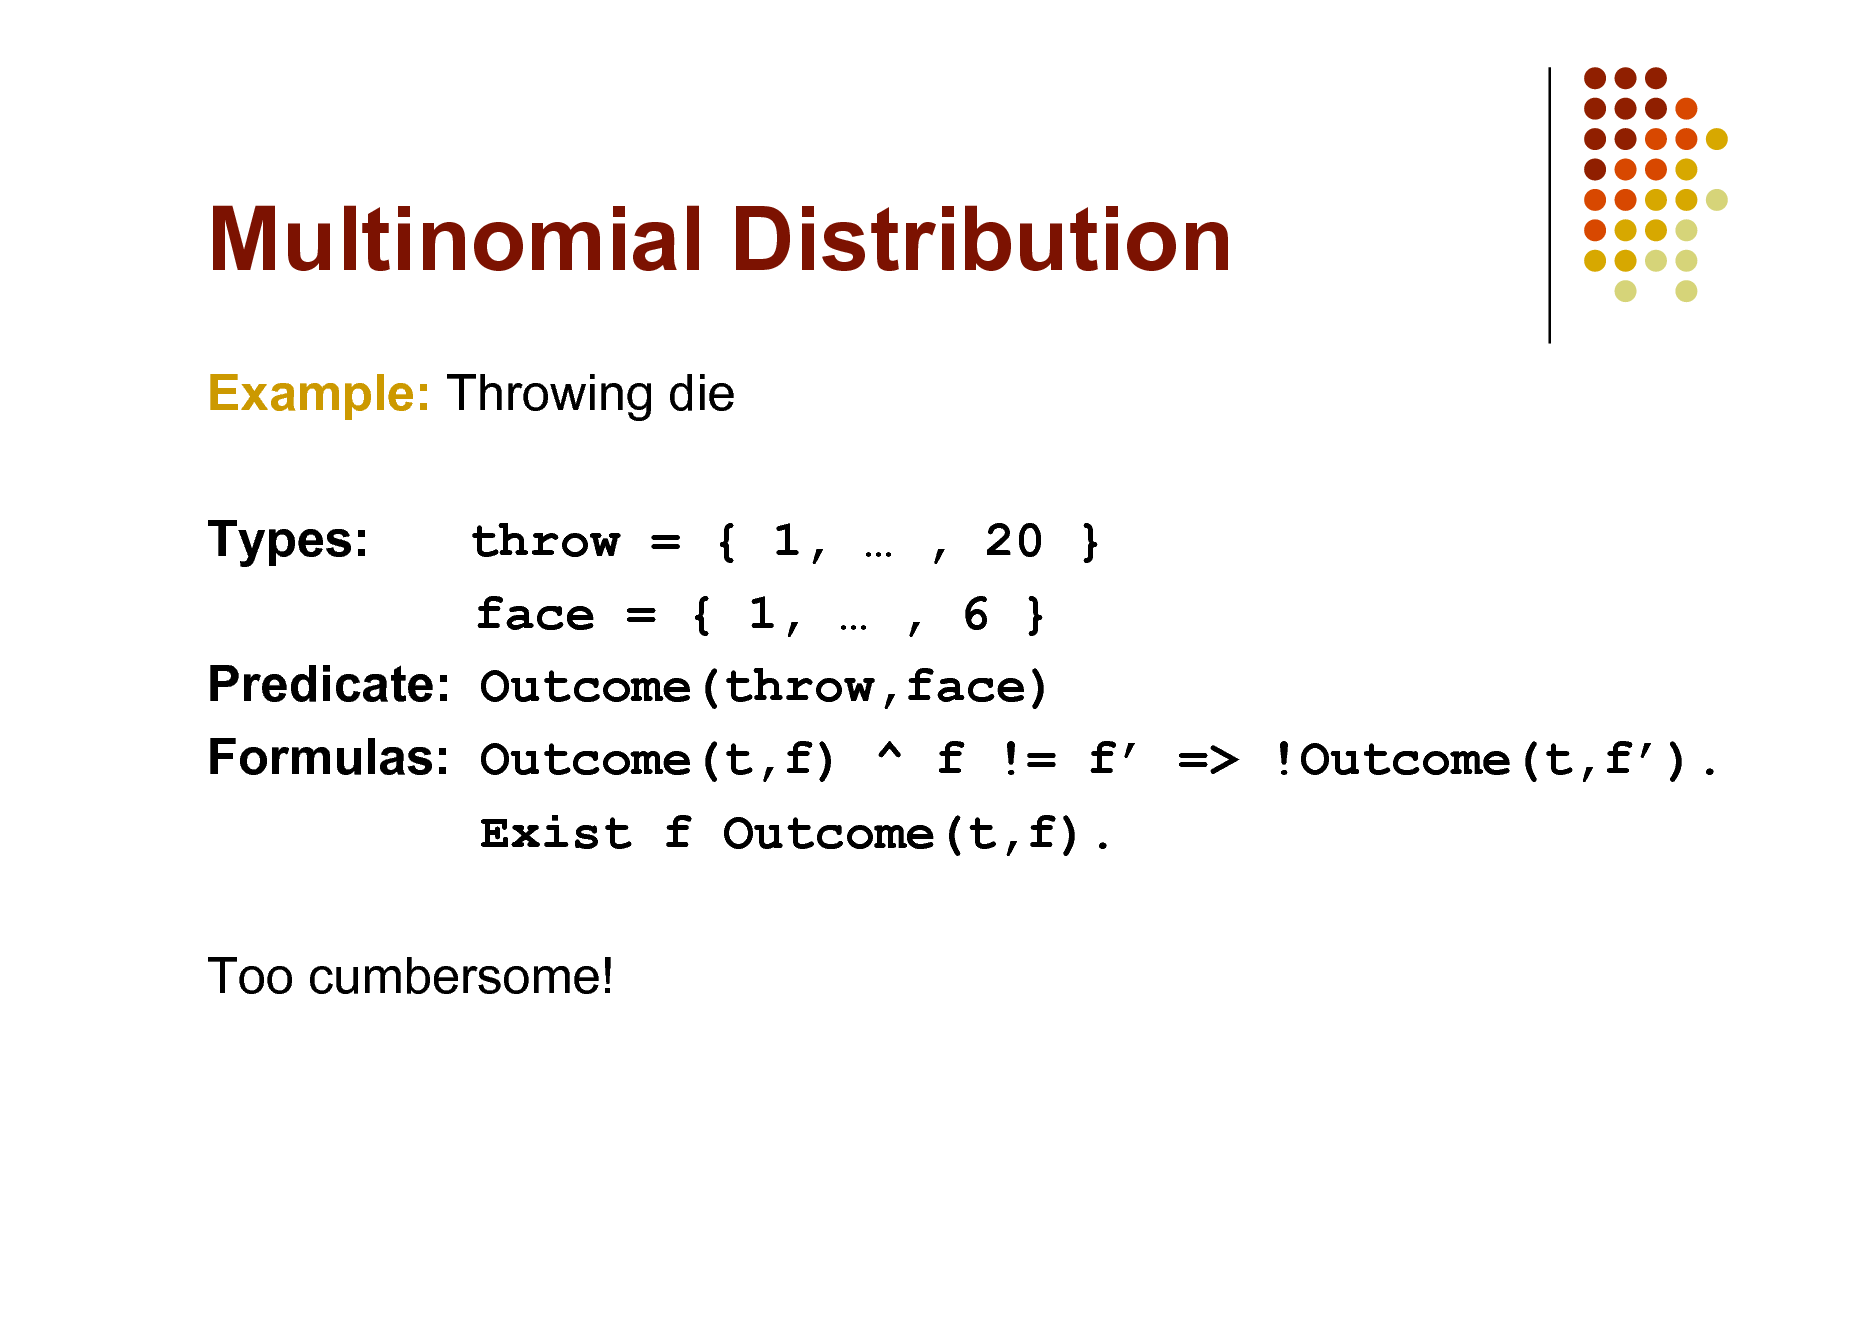 Slide: Multinomial Distribution
Example: Throwing die Types: throw = { 1,  , 20 } face = { 1,  , 6 } Predicate: Outcome(throw,face) Formulas: Outcome(t,f) ^ f != f => !Outcome(t,f). Exist f Outcome(t,f). Too cumbersome!

